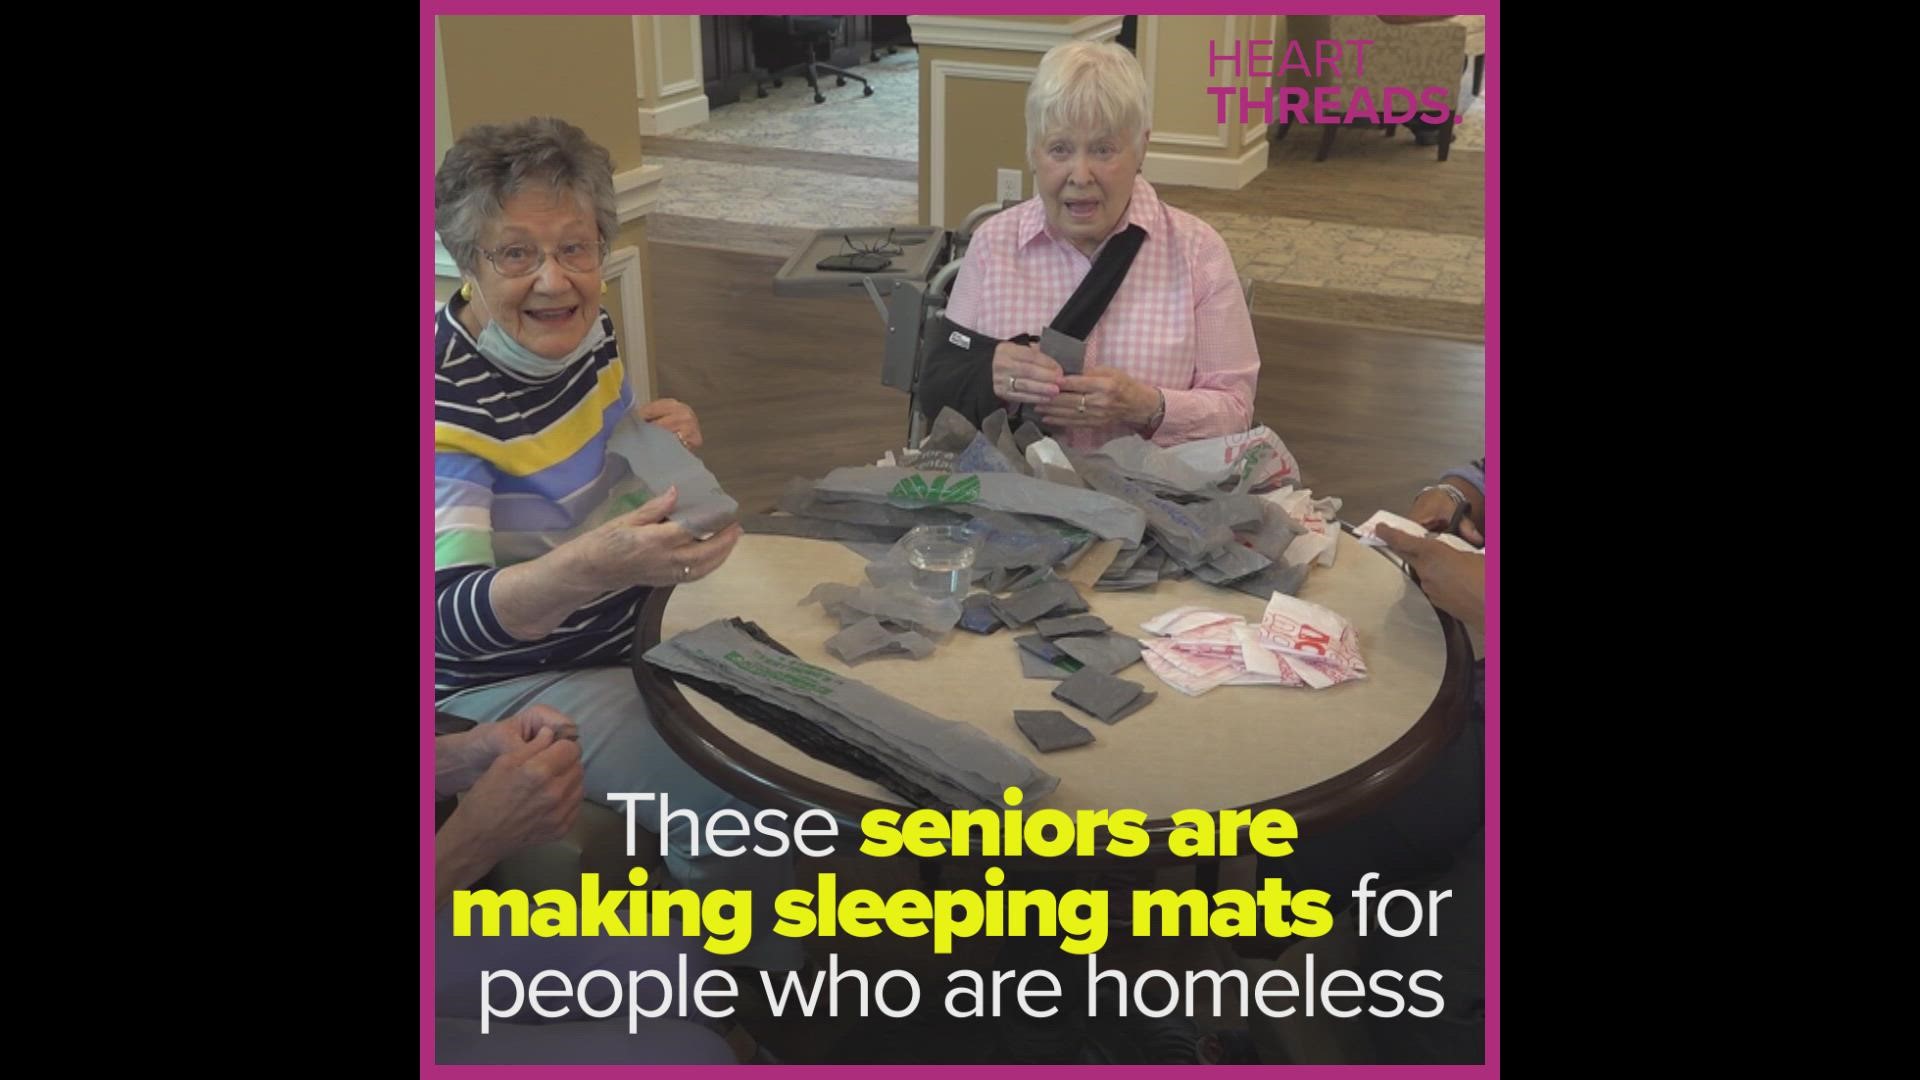 These nursing home residents are giving back to their community by upcycling plastic bags into sleeping mats for people experiencing homelessness.